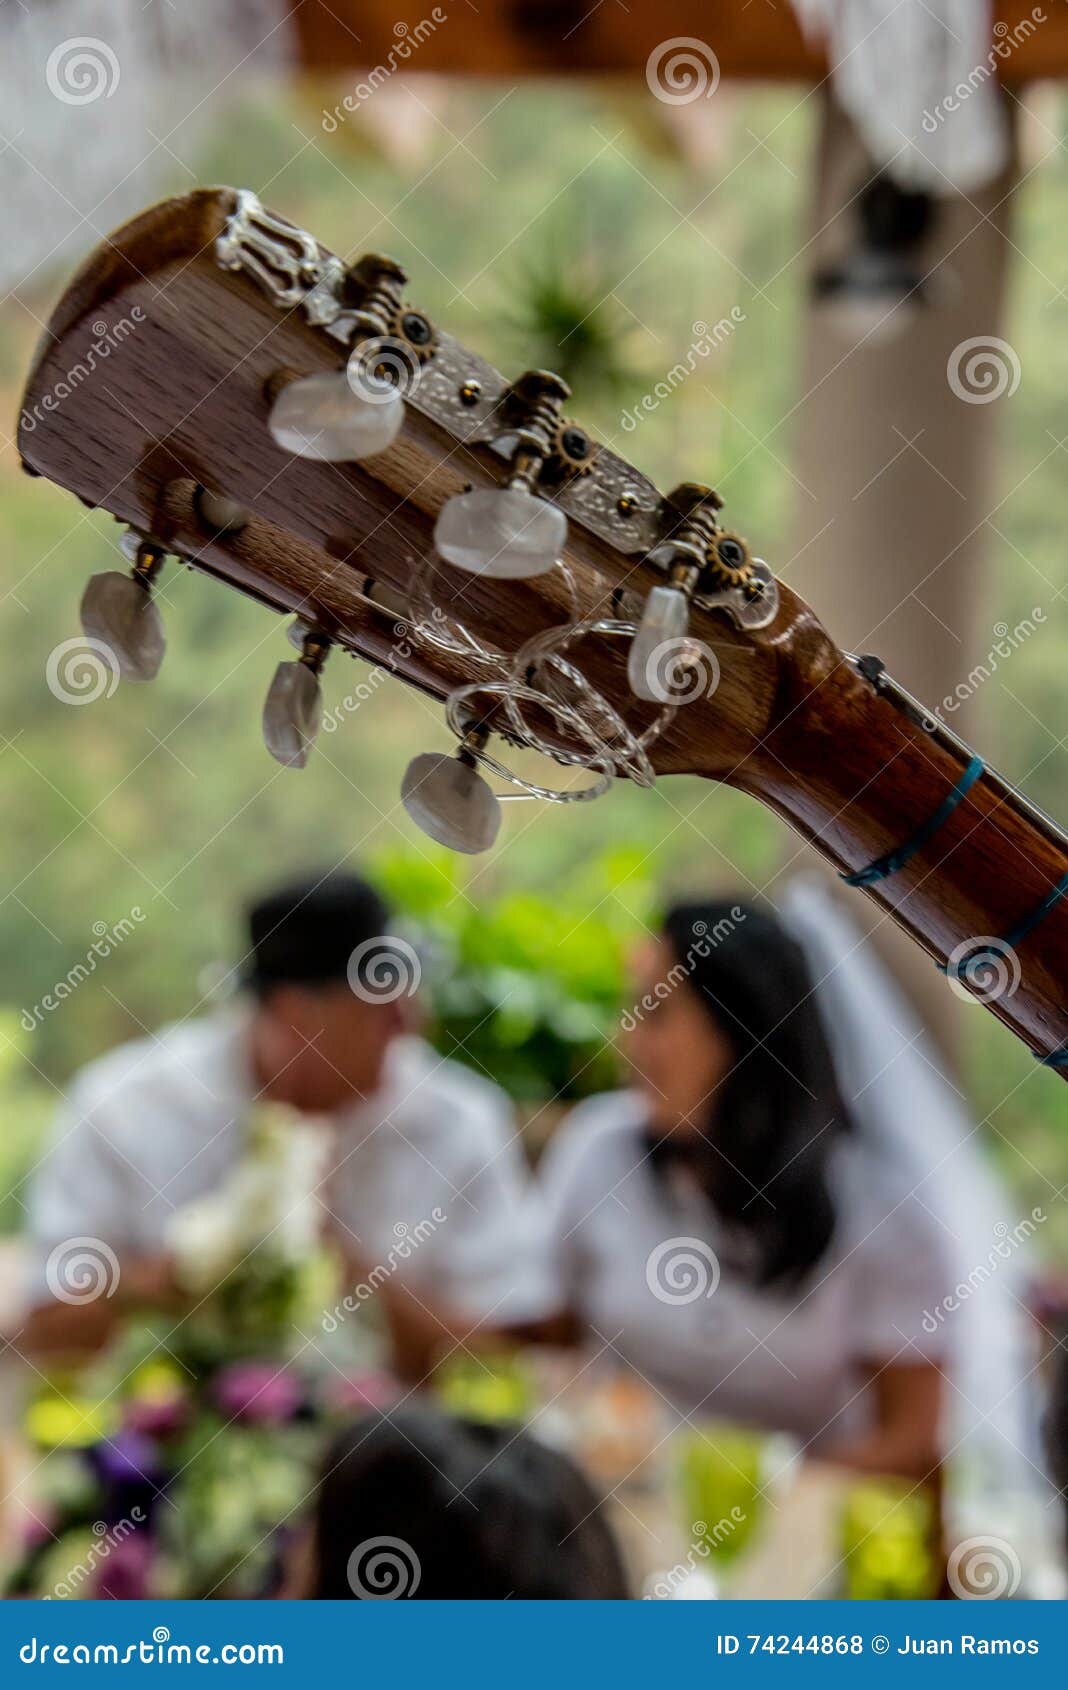 close up on guitar tuning knobs at marriage